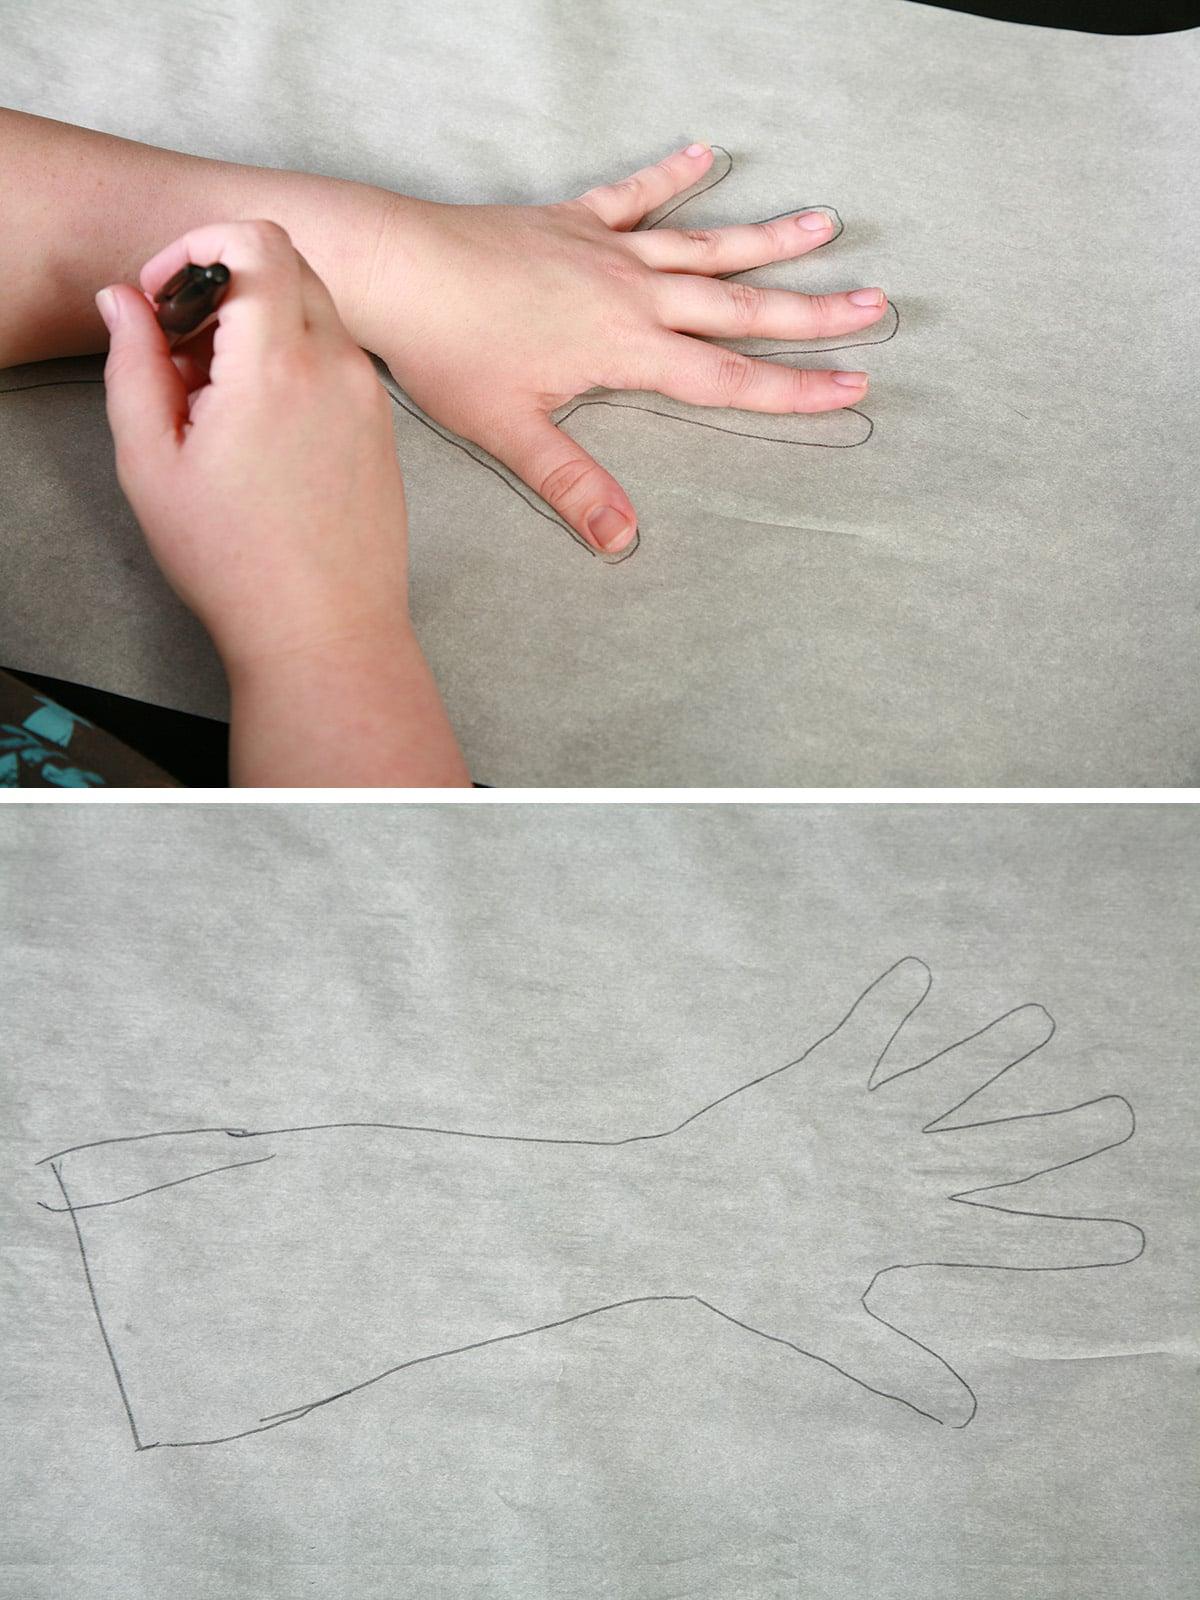 A two photo compilation image showing a hand being traced, and the tracing of the hand.